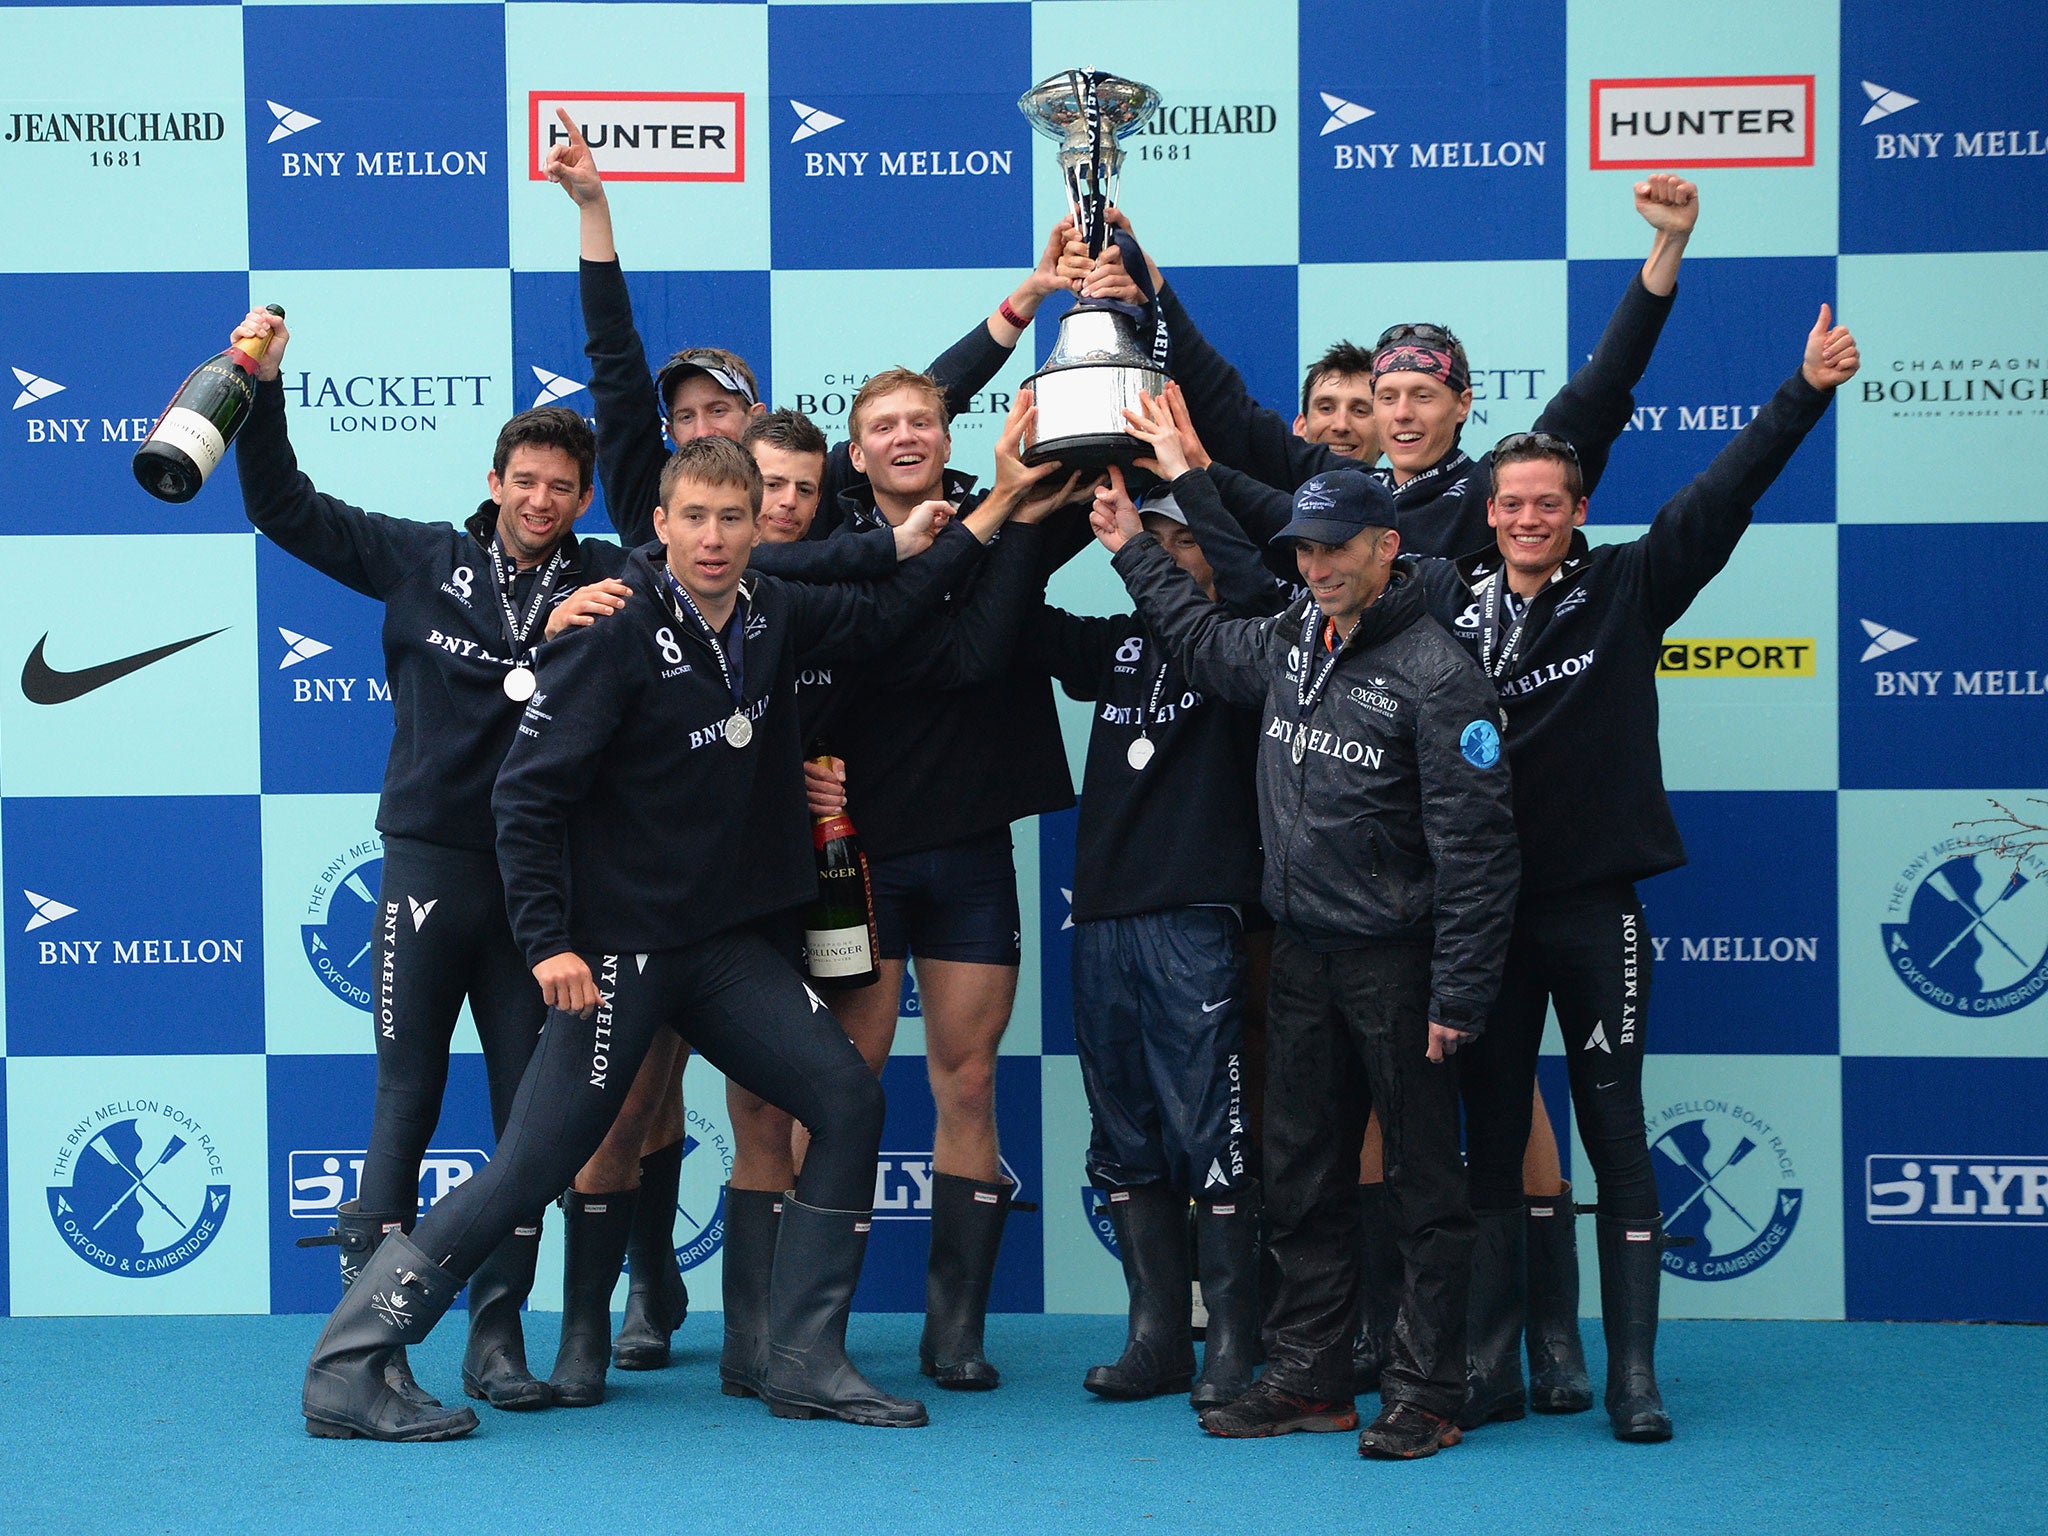 The victorious Oxford crew lift the trophy after winning the 2014 Boat Race